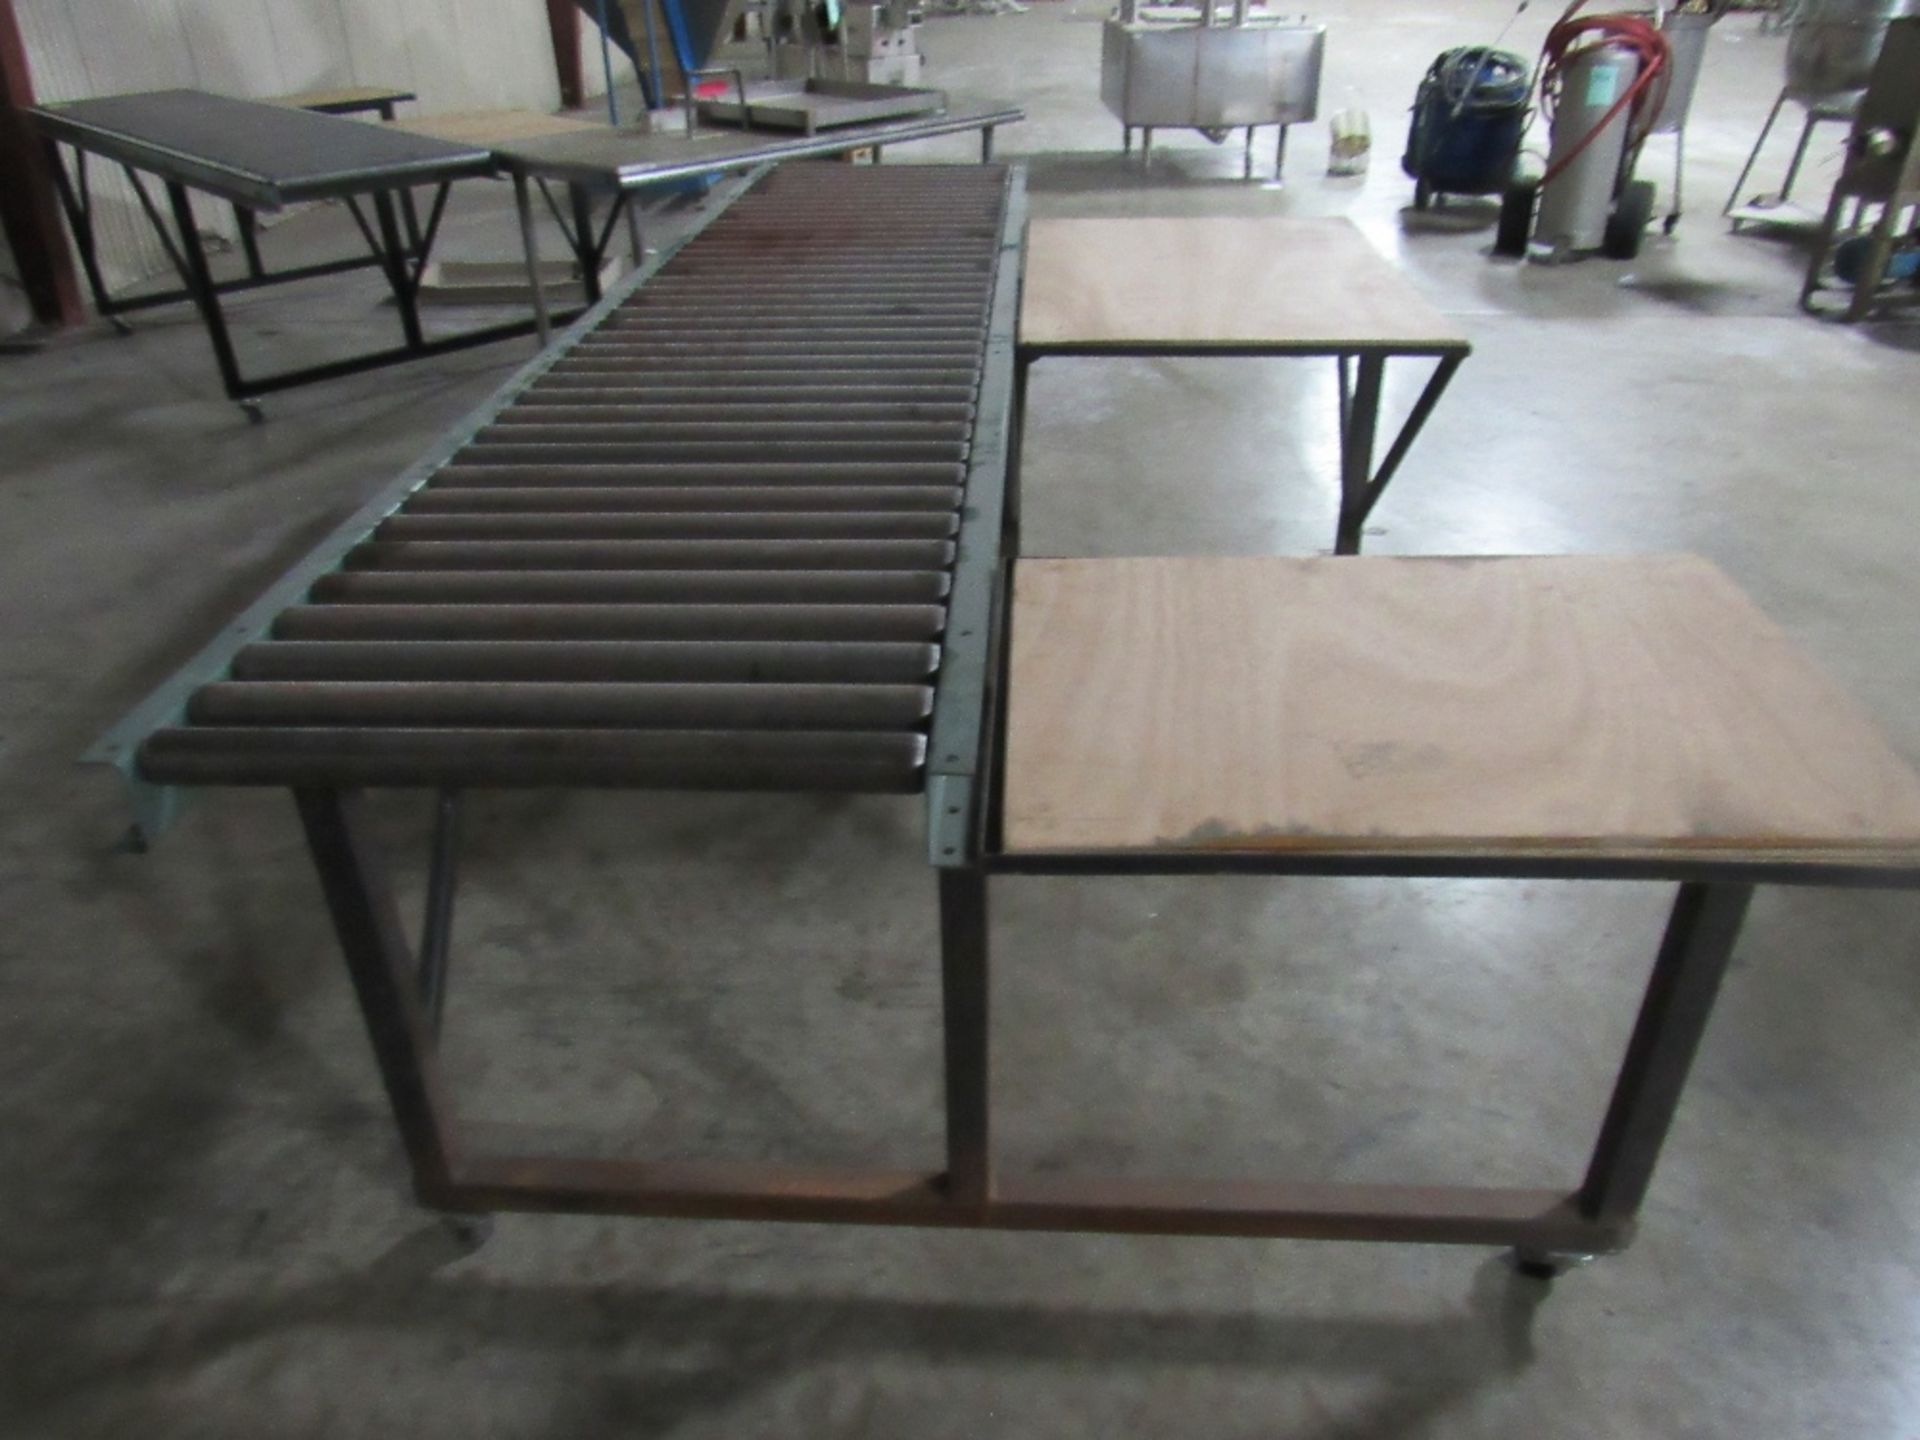 Packing Table with 10ft Hydrol Roller conveyor and two work surface with plywood tops on casters, - Image 12 of 12